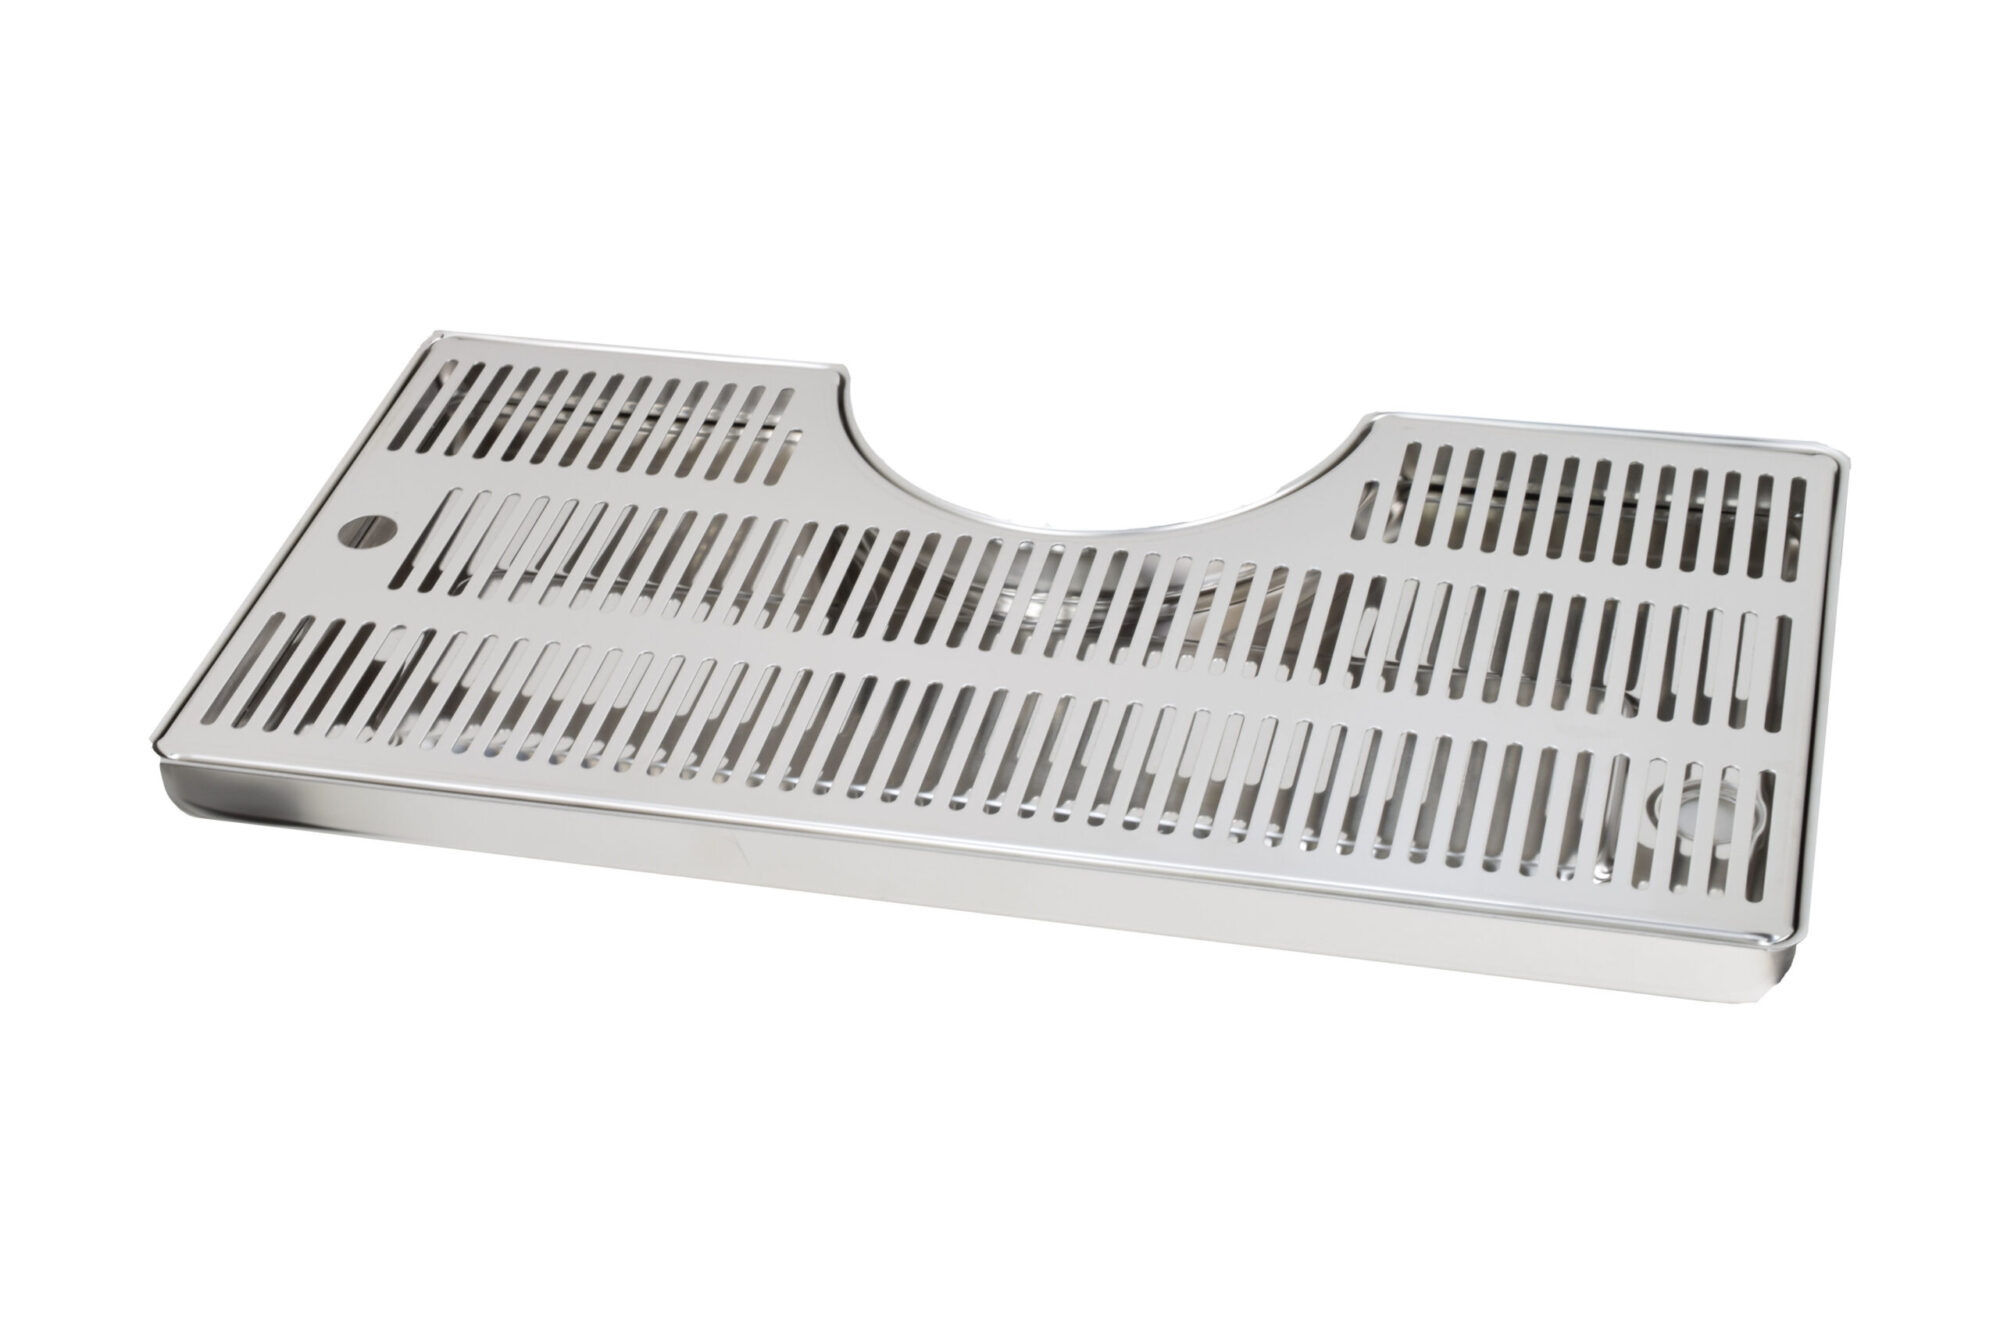 511MS Stainless Steel Tray with Stainless Steel Grid for Ceramic Towers